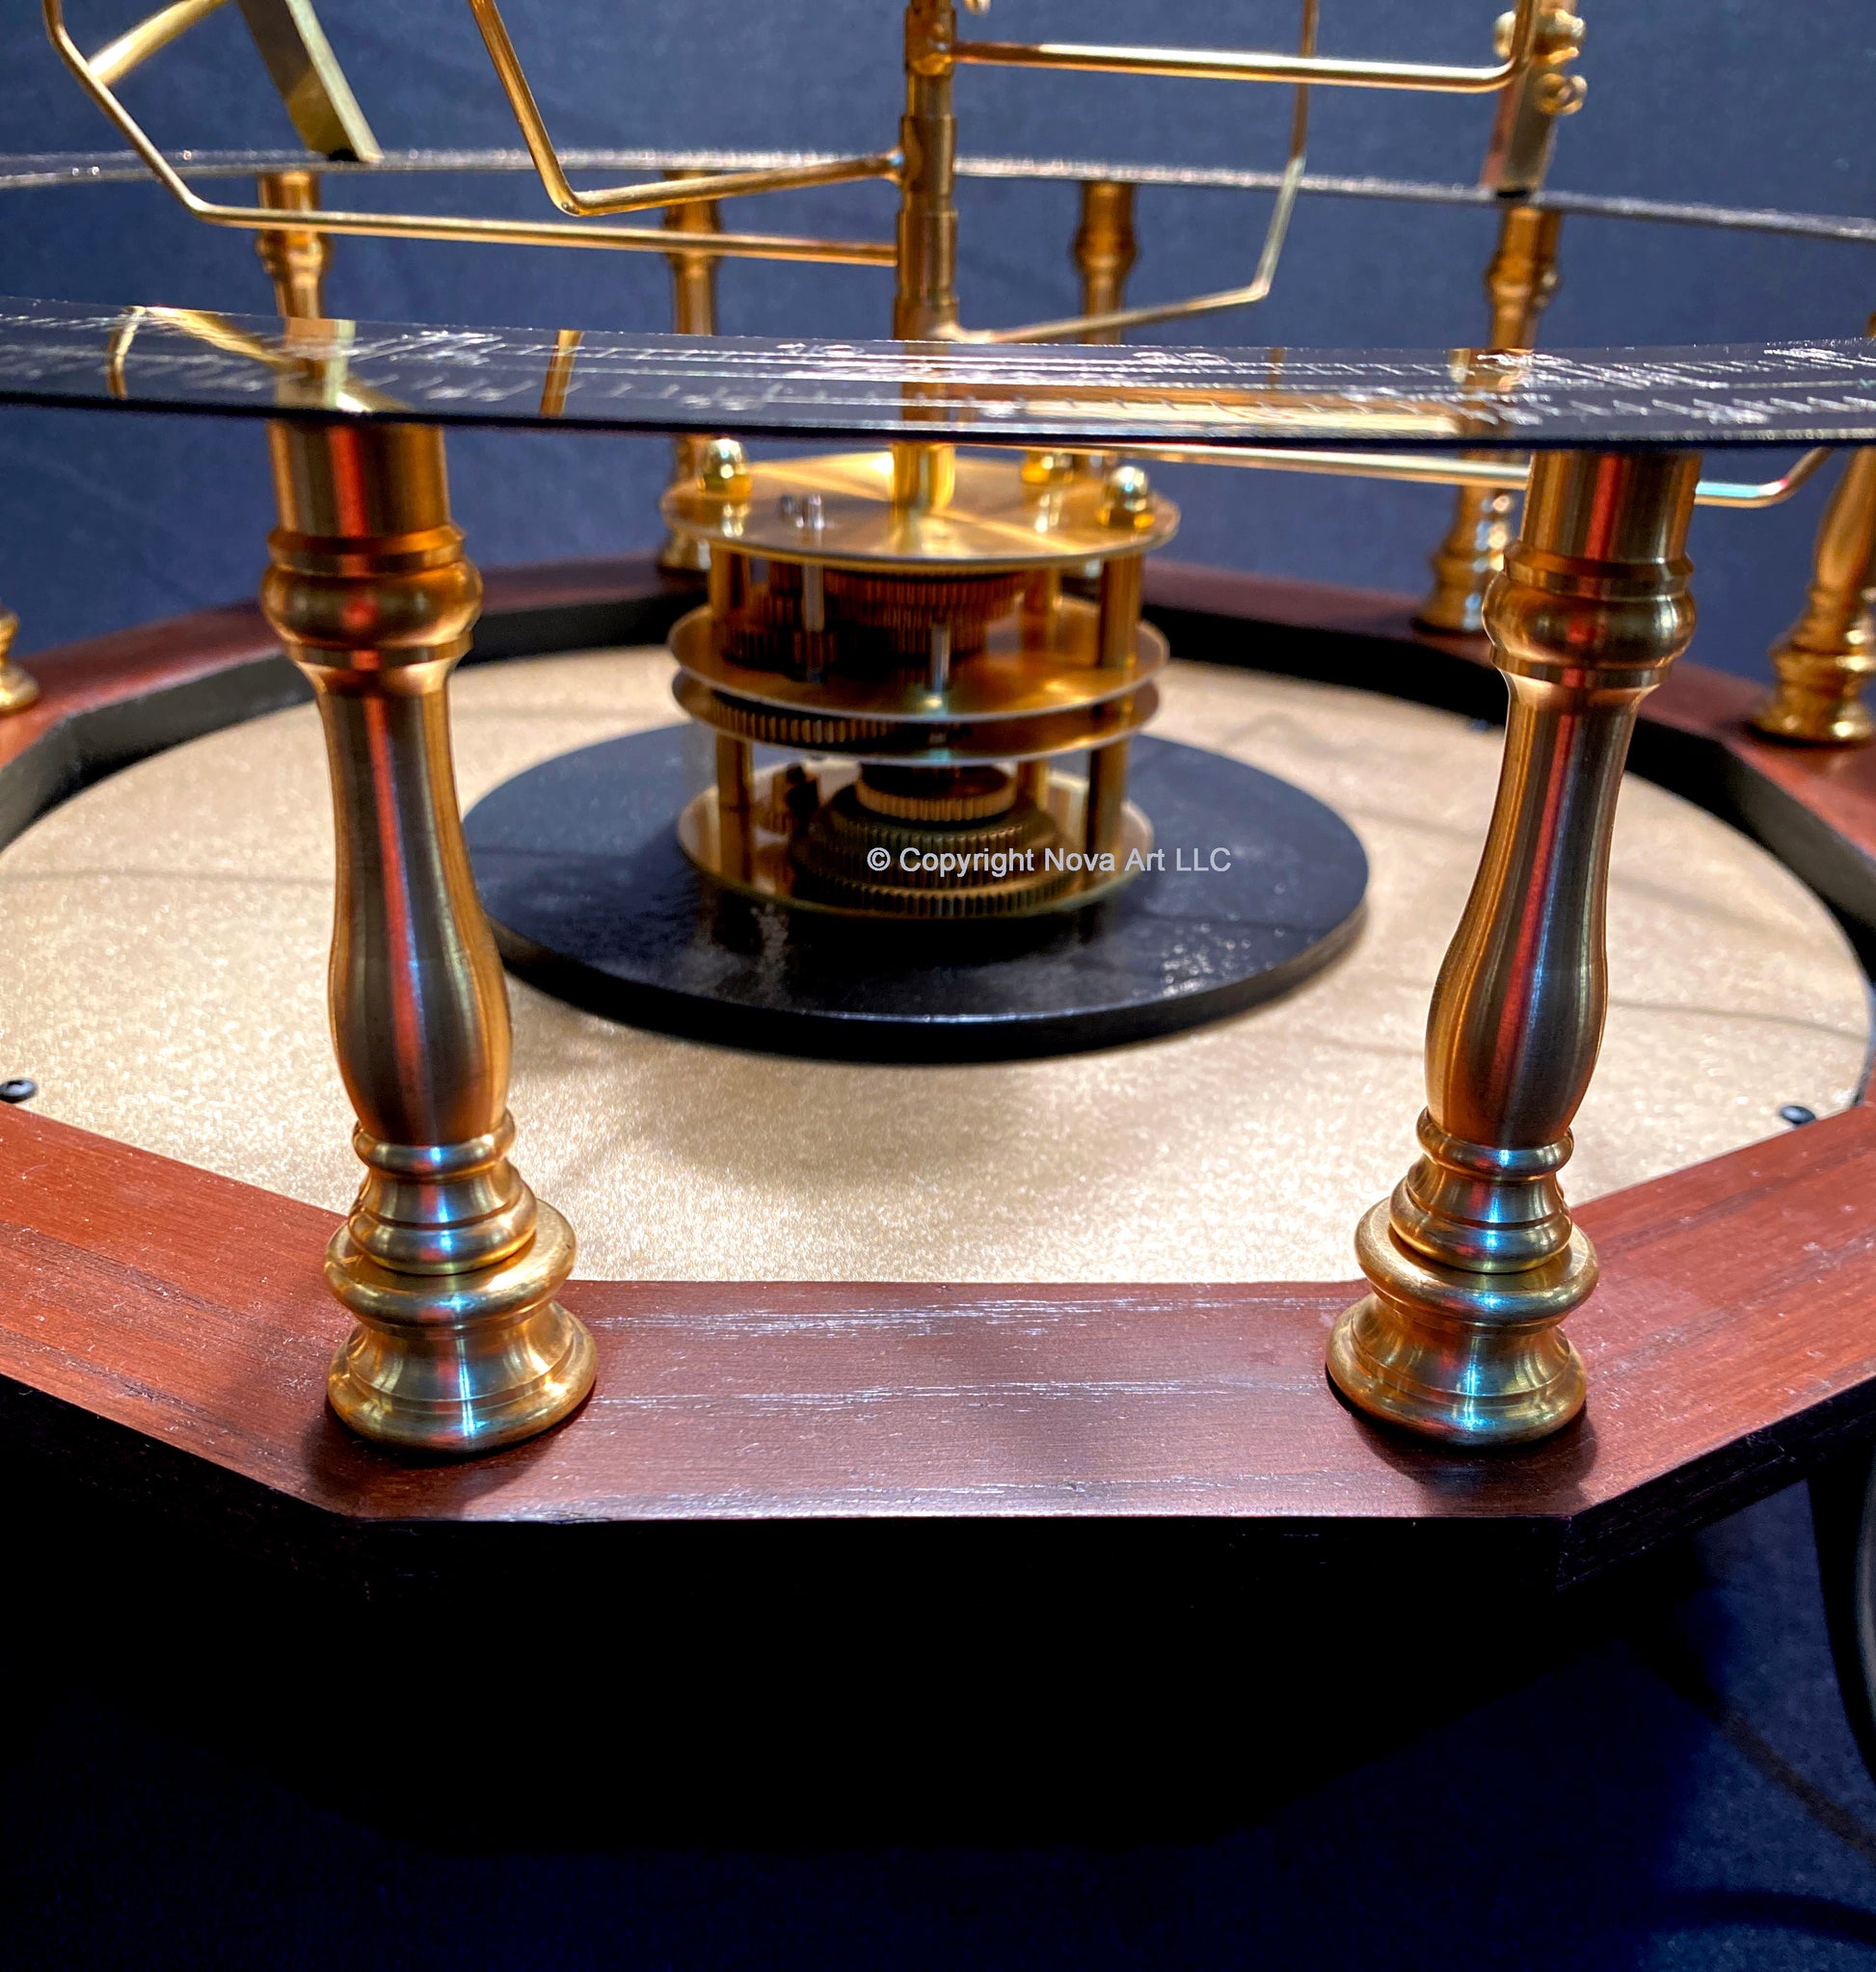 Close up of baby grand orrery from scienceart. Shows brass spindles and red mahogany base. Gear mechanism in middle of platen drives the orrery